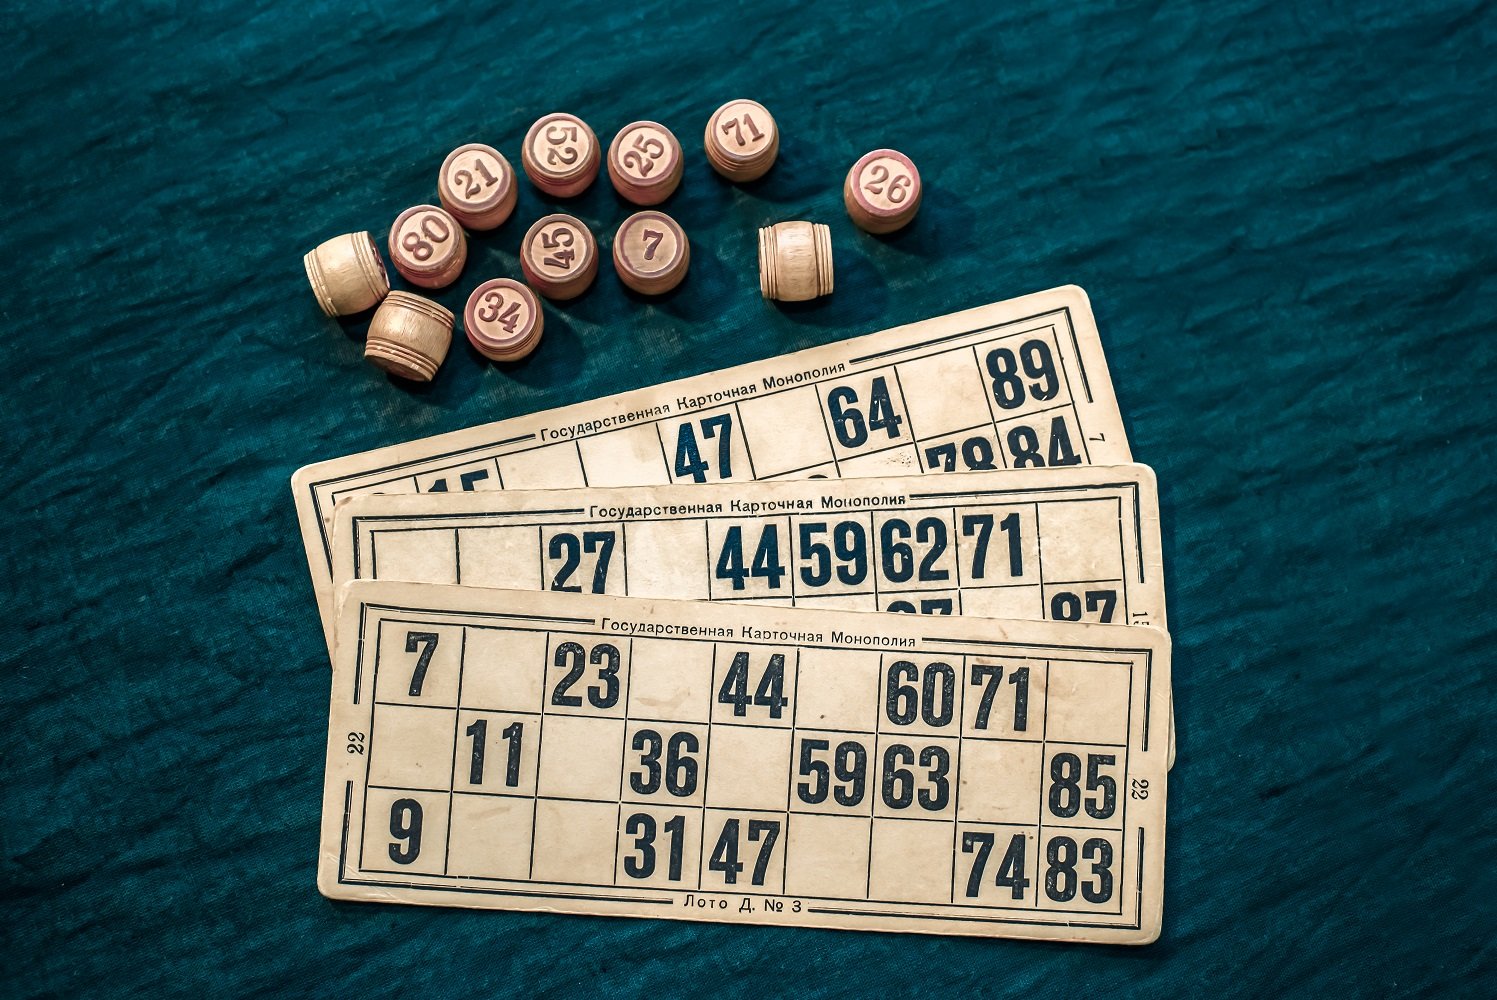 The game of bingo consists of cards and barrels with numbers on a green background, the game russian lotto